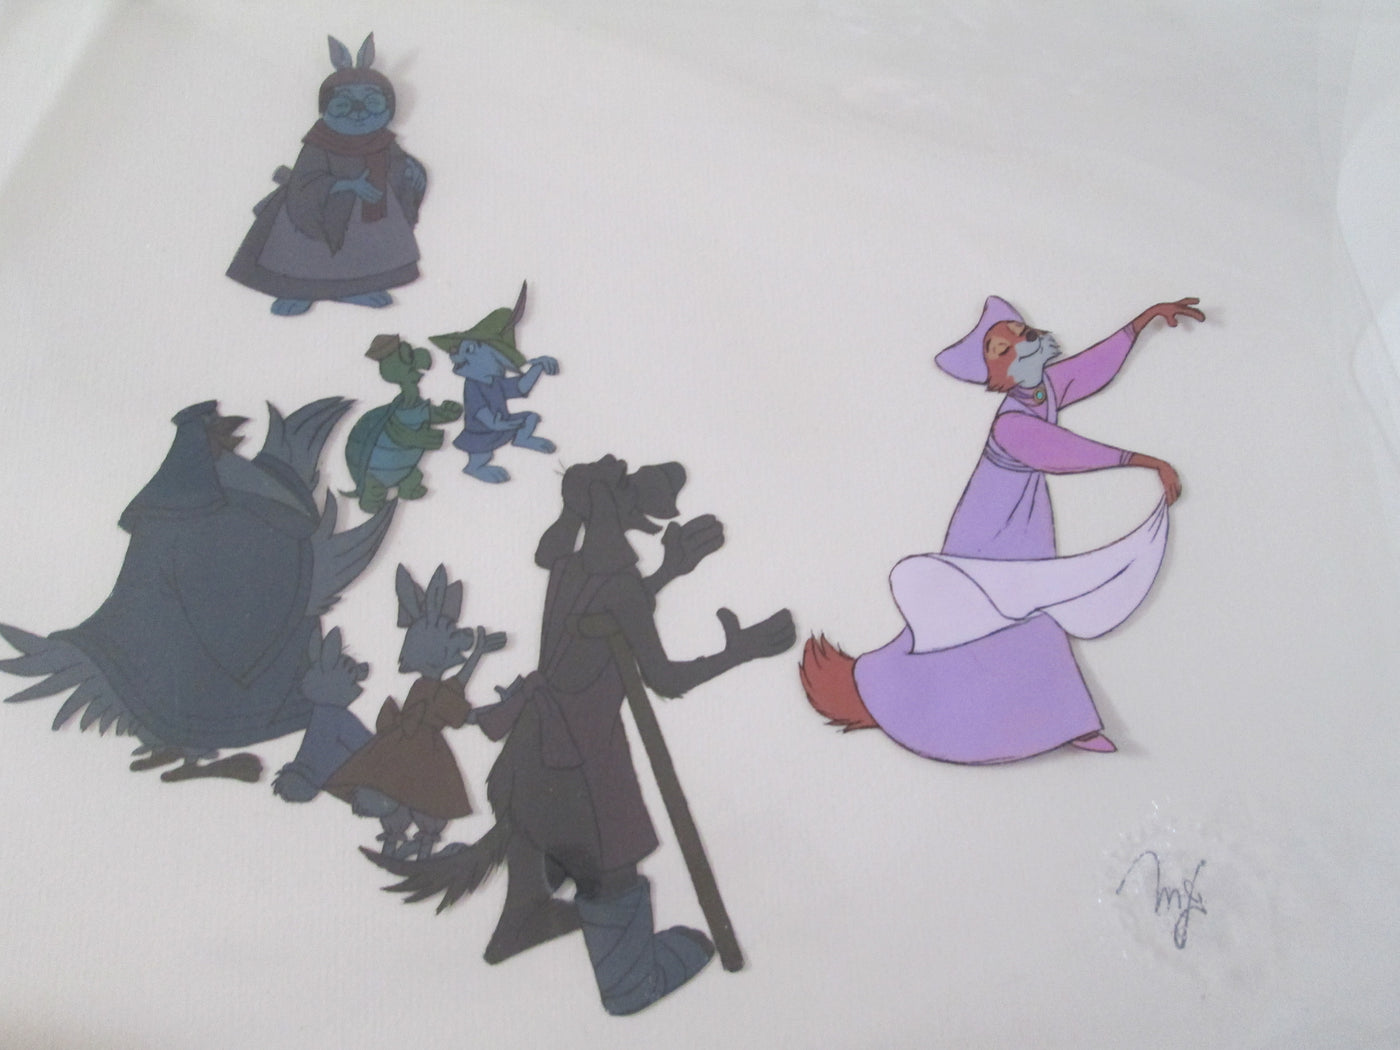 Original Disney Production Cels from Robin Hood featuring Maid Marian, Otto, Sis, Tagalong, Lady Kluck, Toby Turtle, Skippy, and Mother Rabbit